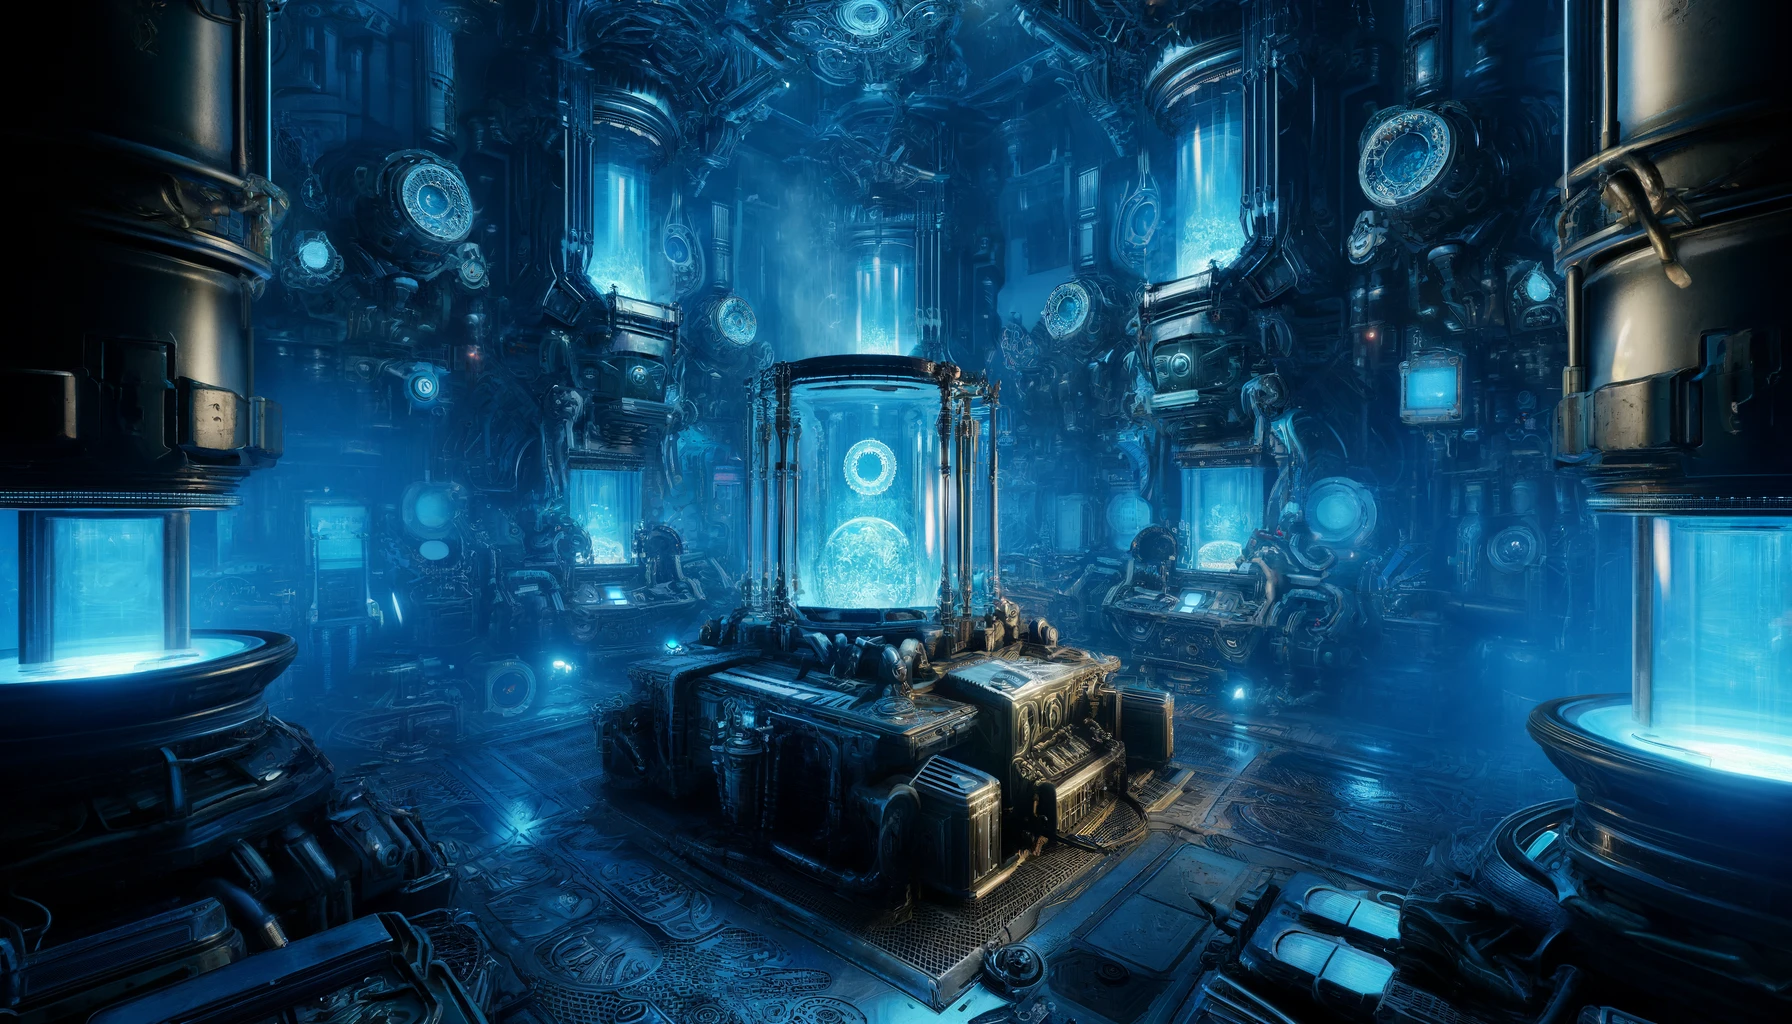 A fantastical laboratory filled with mysterious devices and mechanisms in blue tones, inspired by Quake II interiors, featuring intricate machinery, glowing screens, and futuristic technology illuminated by an eerie blue light.